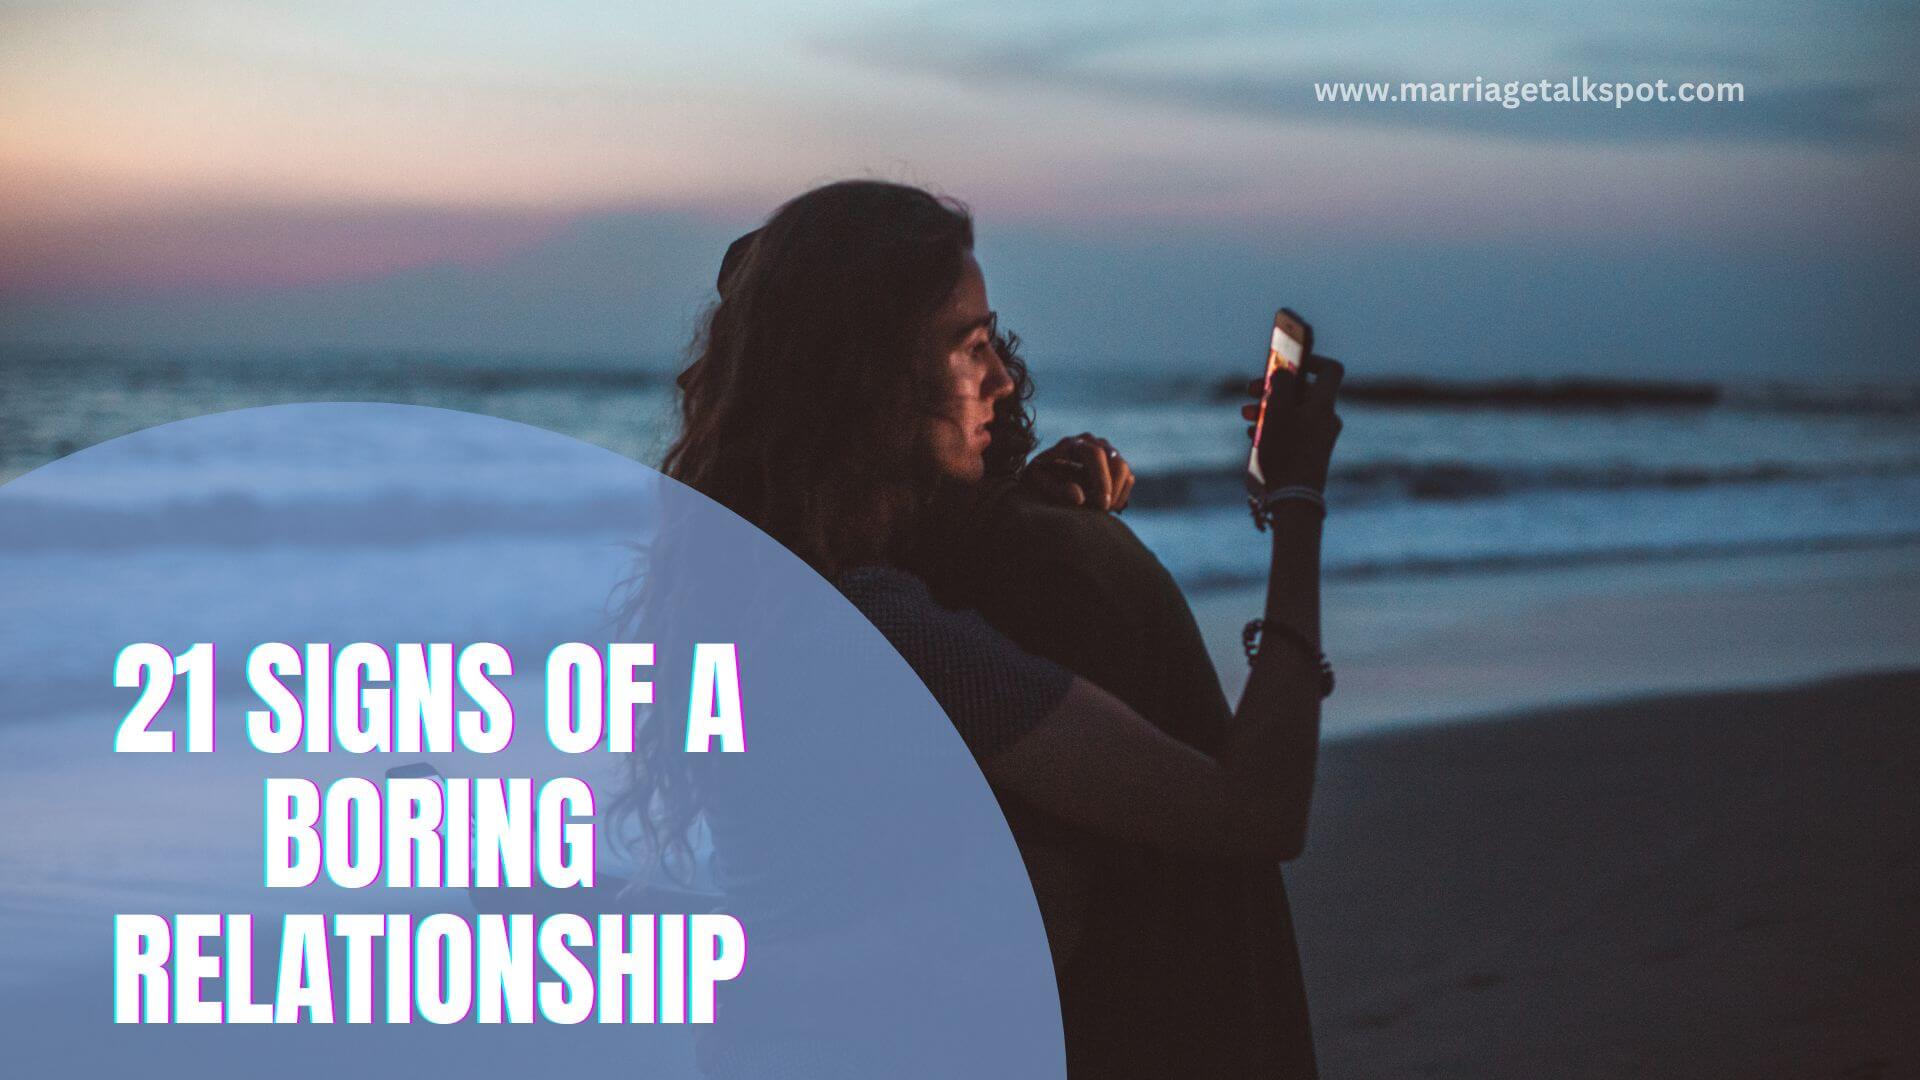 Signs of a boring relationship